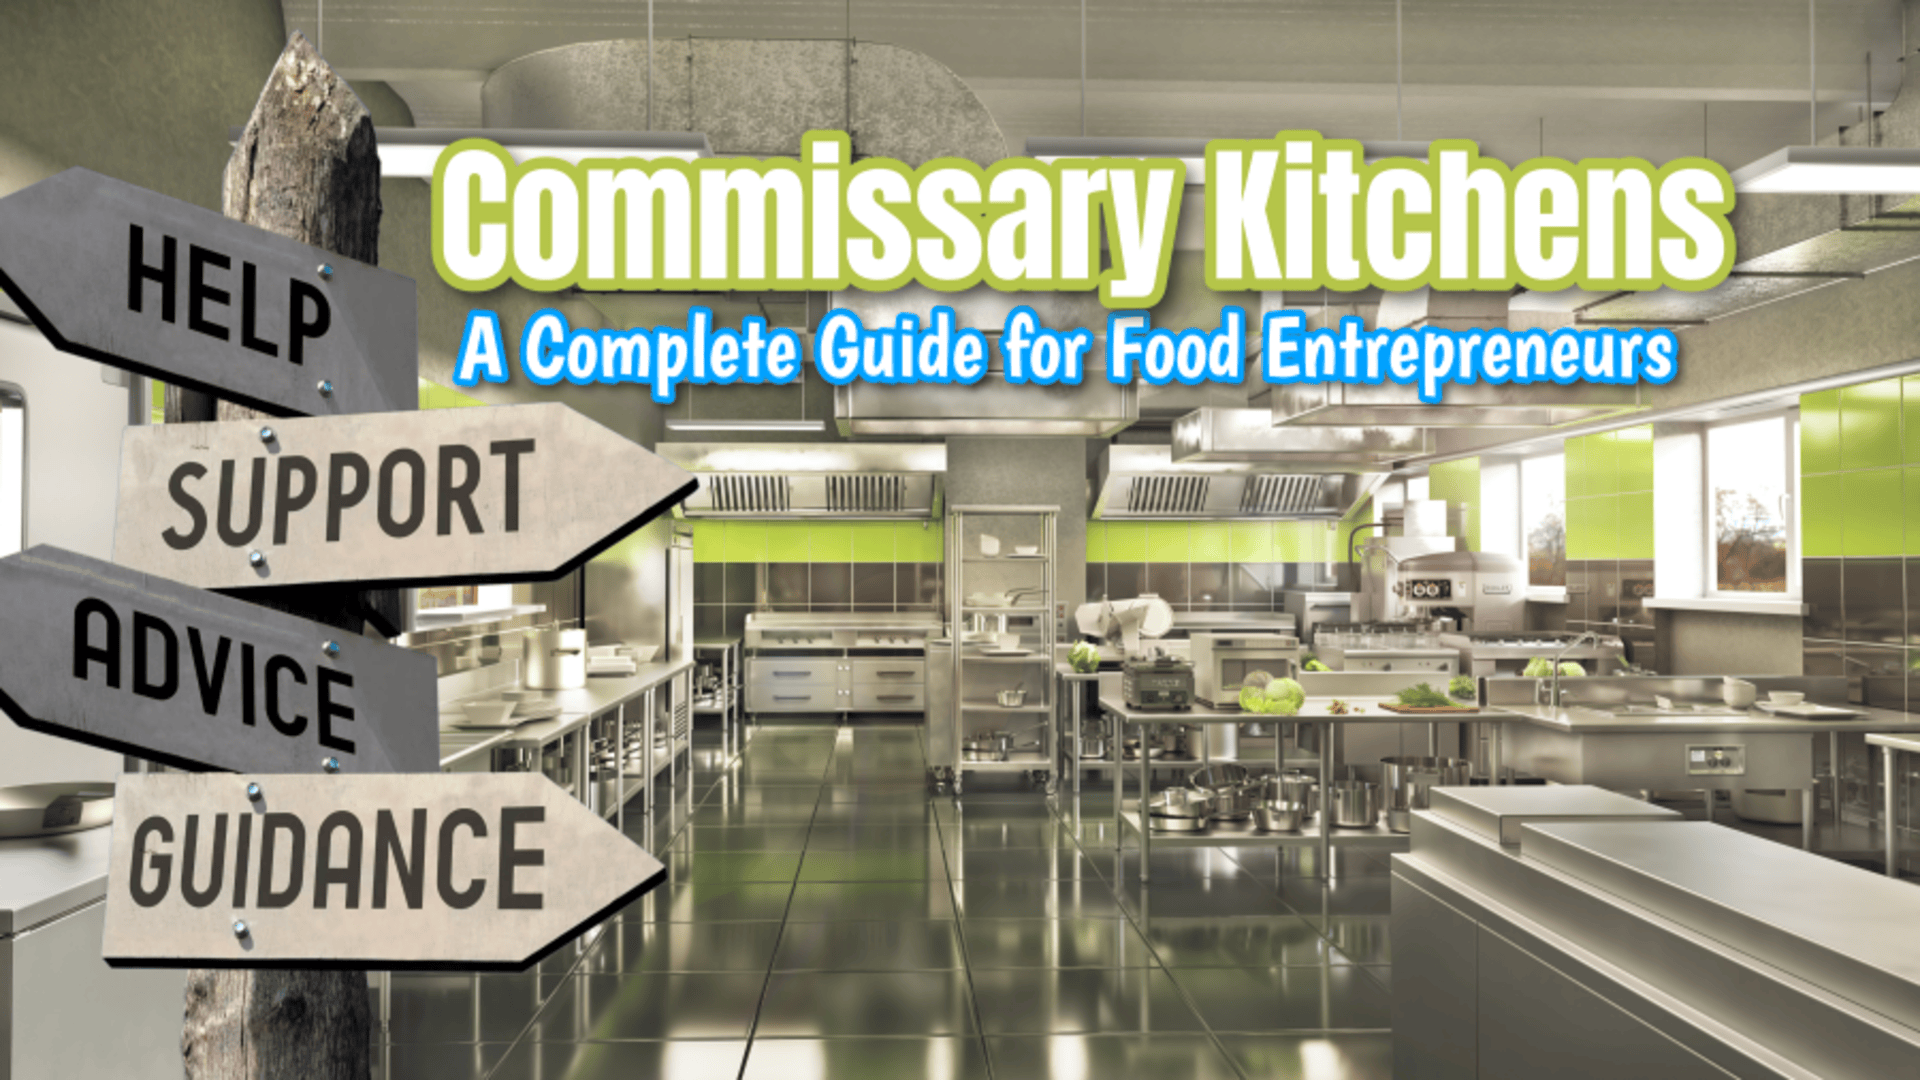 Commissary-Kitchens-A-Complete-Guide-for-Food-Entrepreneurs_5b6f5 BISTRO BUDDY - FOOD & DRINK NETWORK - A COMMUNITY-DRIVEN PLATFORM THAT EMPOWERS GROWTH THROUGH TECHNOLOGY & LOCAL COLLABORATION  Discover and support your local food and drink event scene on the ultimate platform for foodies. Connect & collaborate with local restaurants, food trucks, farmers' markets, breweries, wineries, and more. Featuring digital menus with online ordering & zero commissions, businesses can promote deals, merchandise, events, and jobs. Subscribe & stay up-to-date with local and industry news and trends from local food and drink influencers and creators.